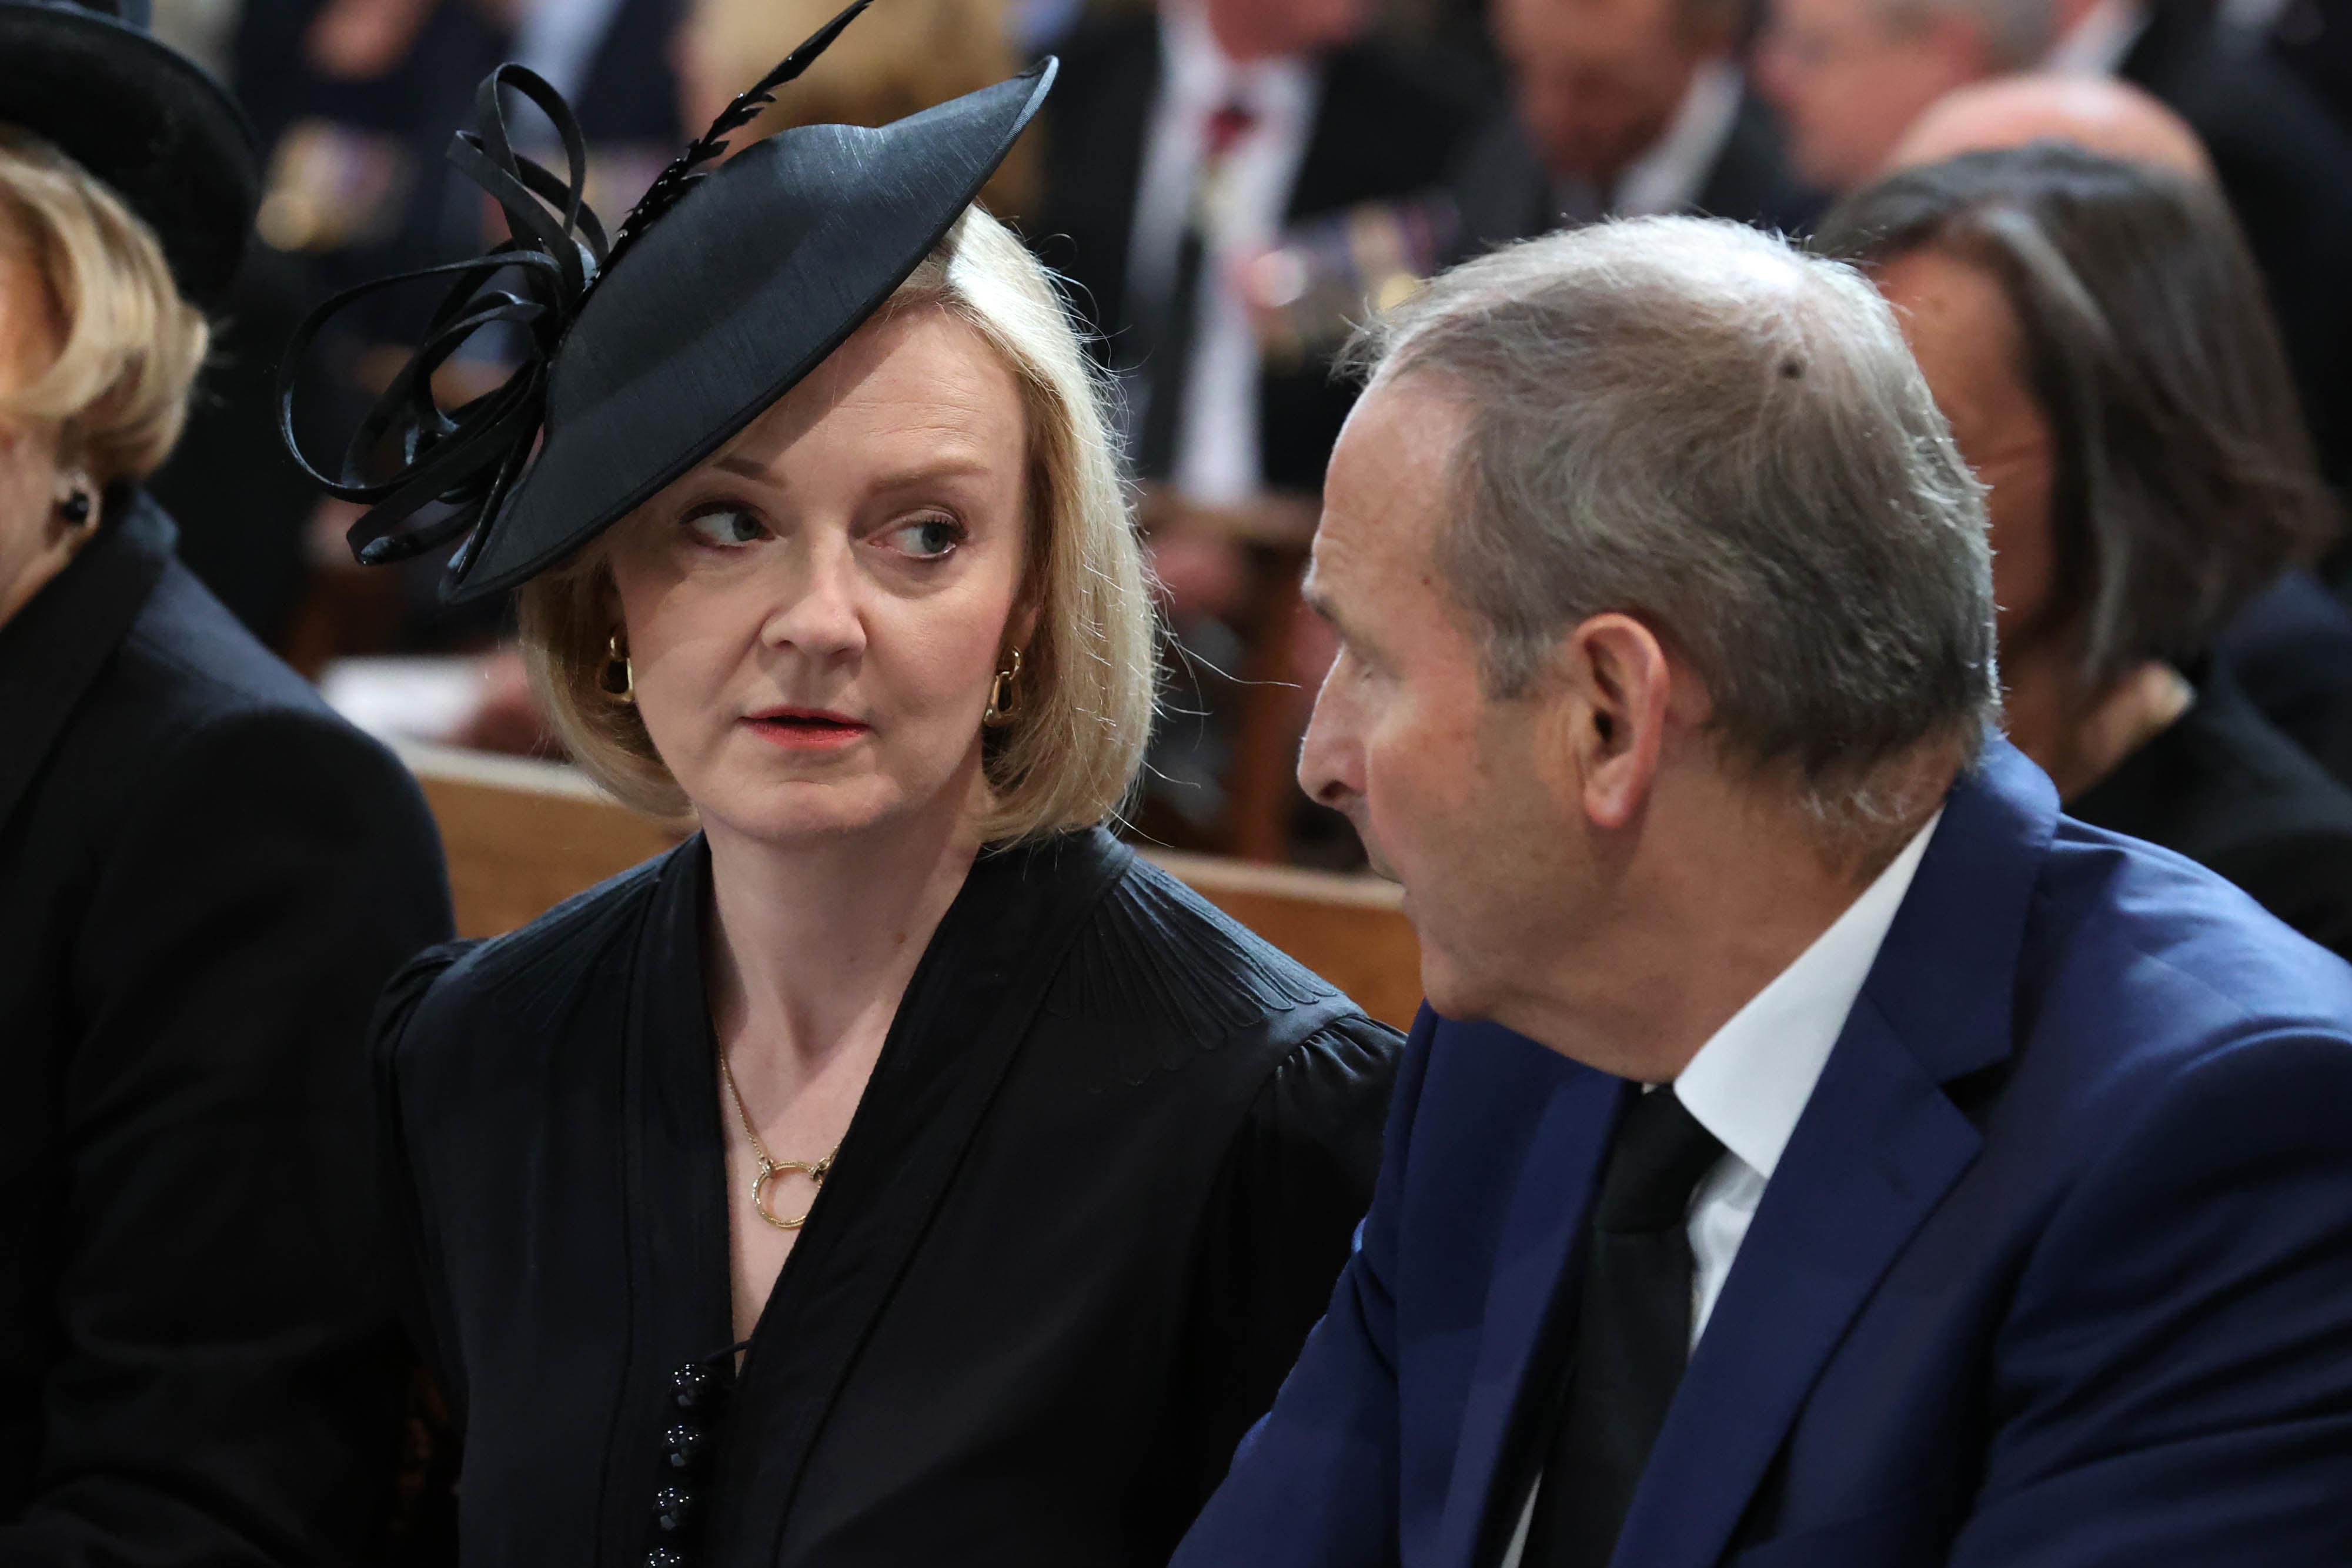 Prime Minister Liz Truss and Taoiseach Micheal Martin attend a Service of Reflection for Queen Elizabeth II at St Anne’s Cathedral in Belfast. Picture date: Tuesday September 13, 2022.